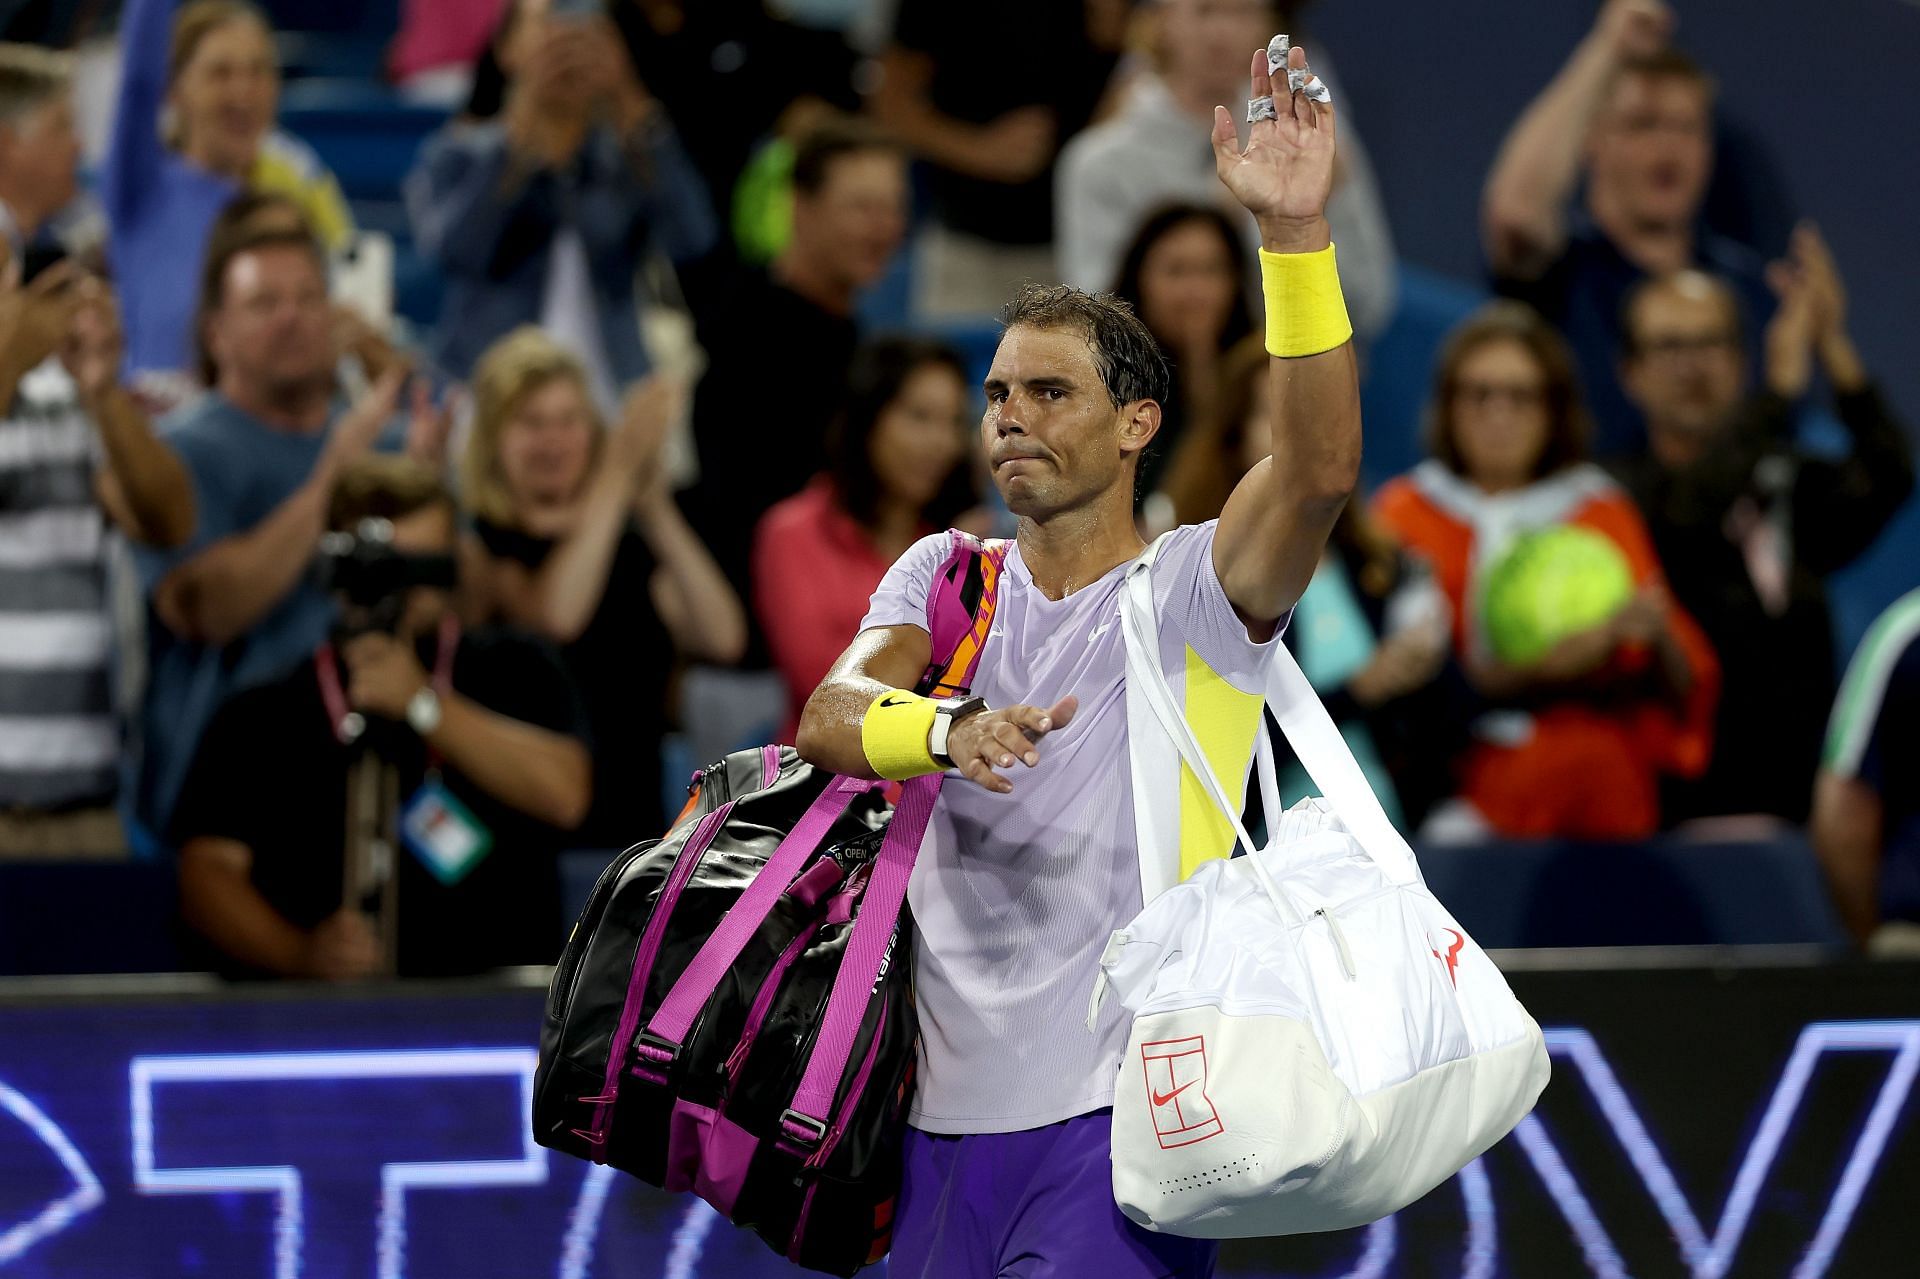 Rafael Nadal was defeated in his opening match in Cincinnati by Borna Coric